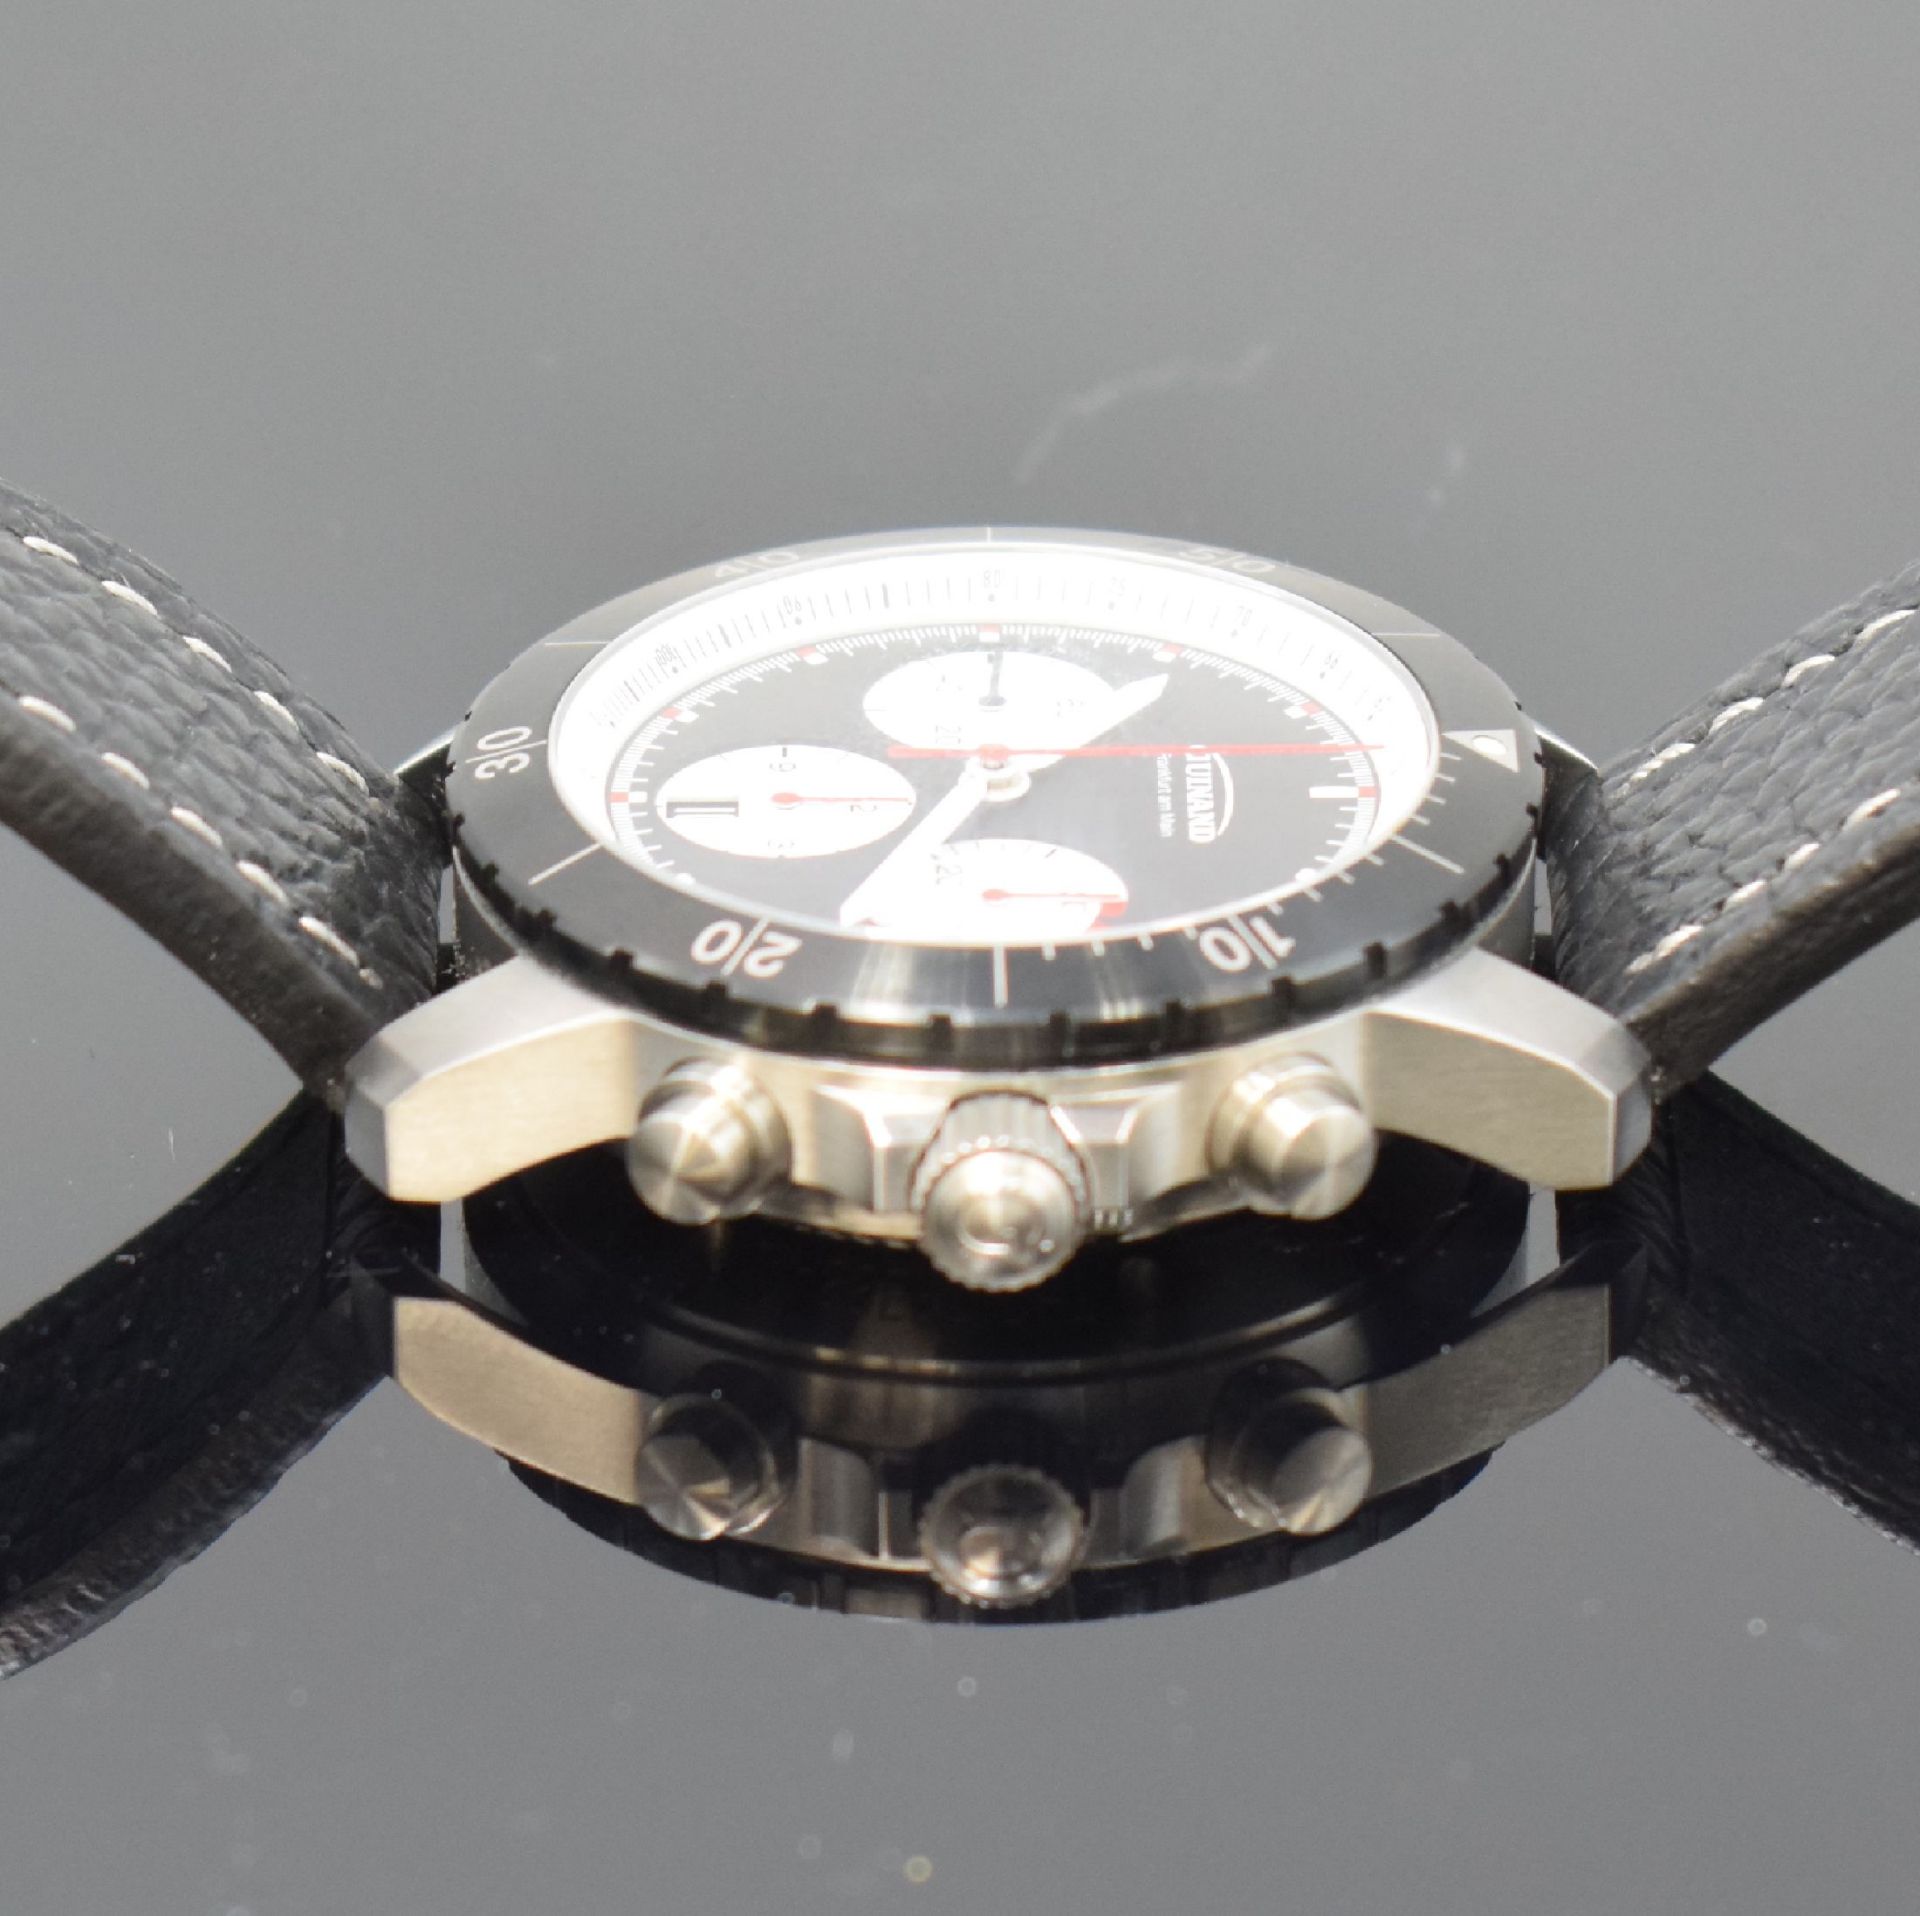 GUINAND Jubiläums-Armbandchronograph in Stahl, Automatik, - Image 5 of 8